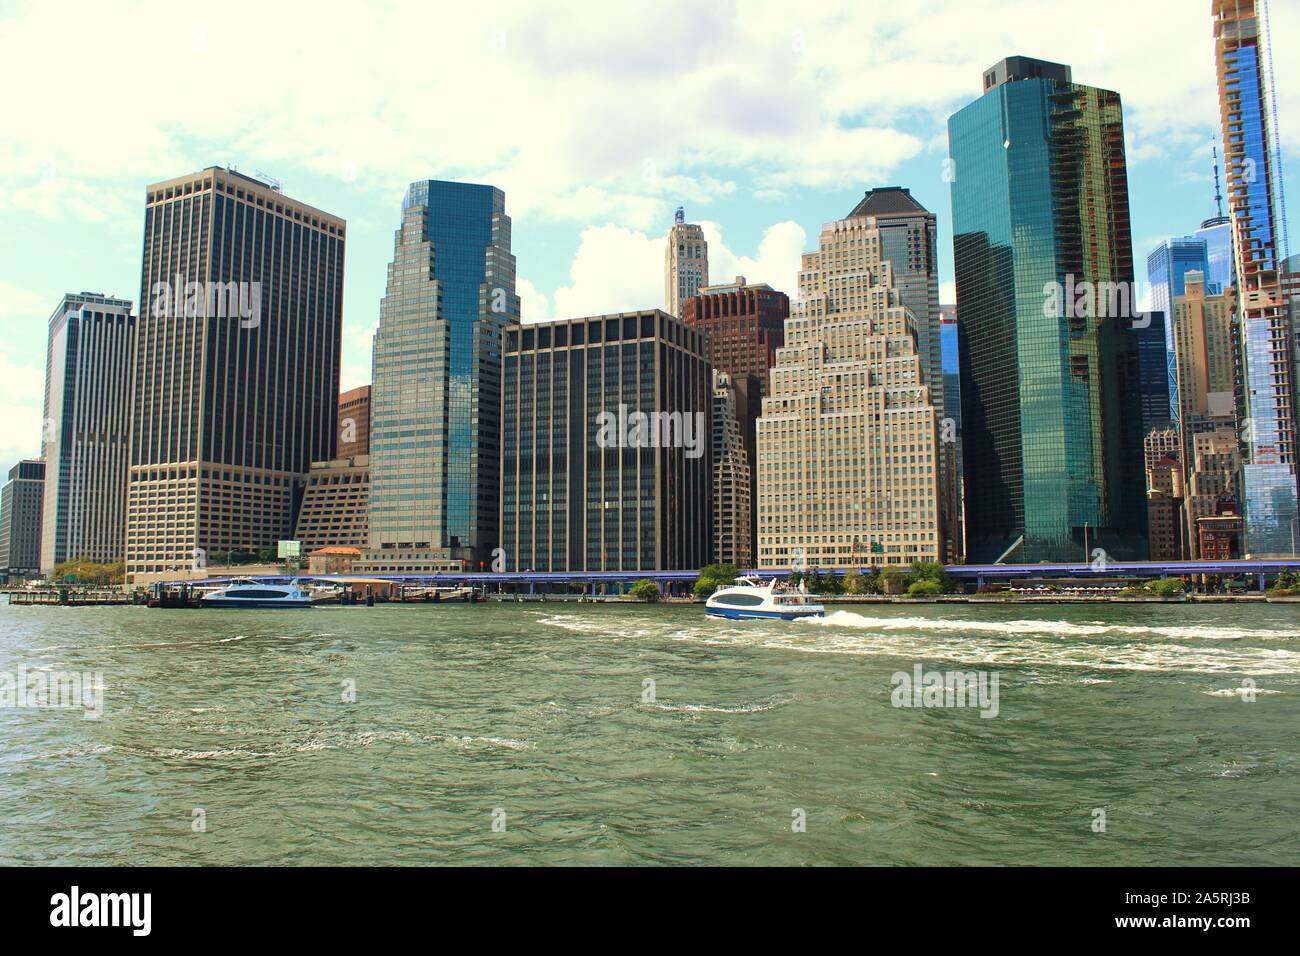 View from the East River, New York City, of some of the skyscrapers that form the iconic, scenic, skyline of Downtown Lower Manhattan. Stock Photo